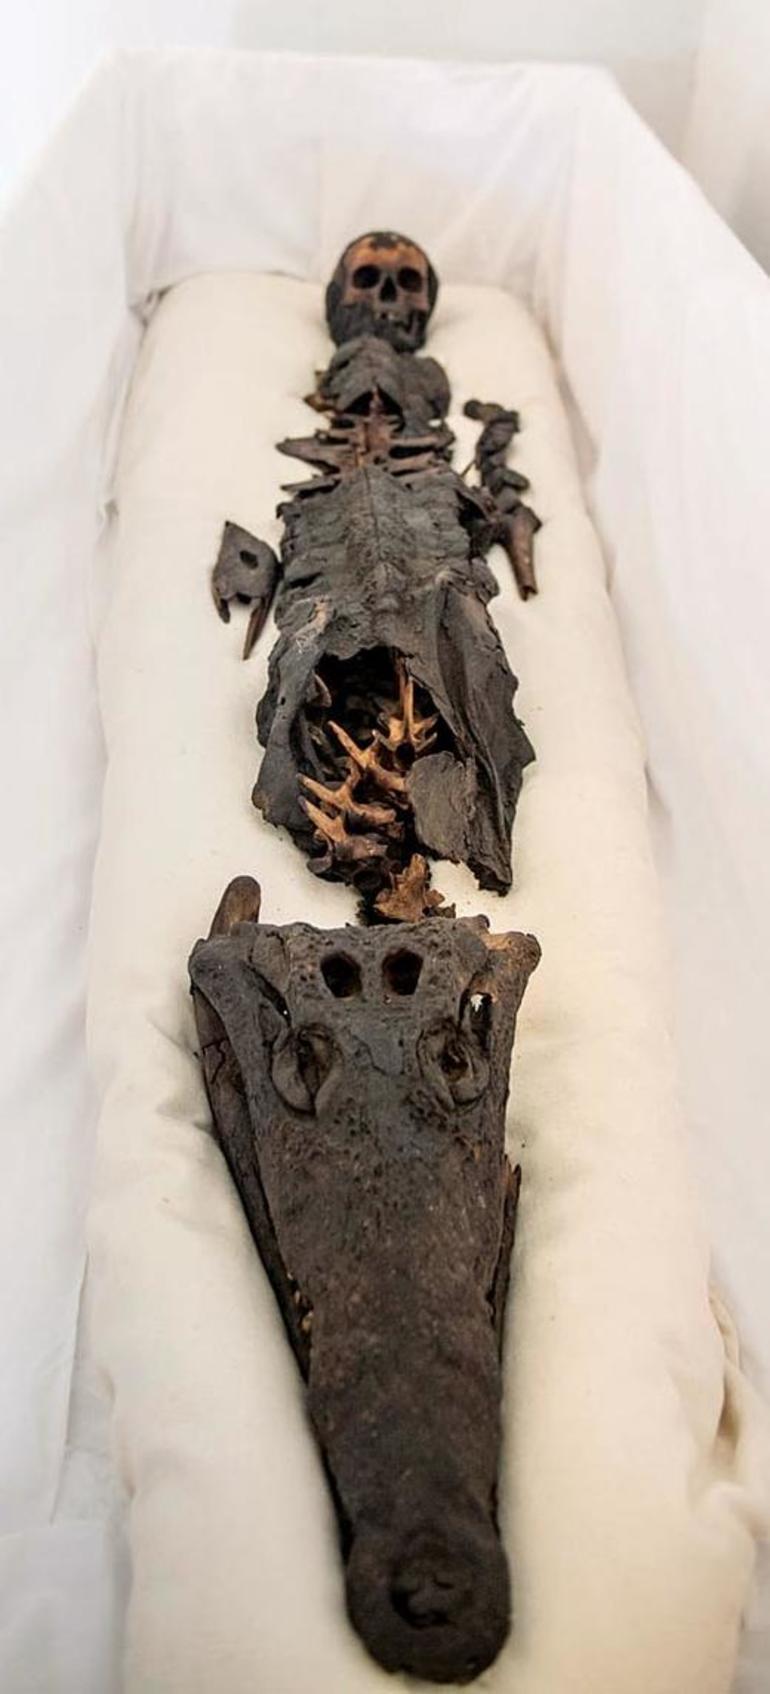  An ancient Egyptian mummy with two heads, belonging to a human and a crocodile, has been photographed for the first time